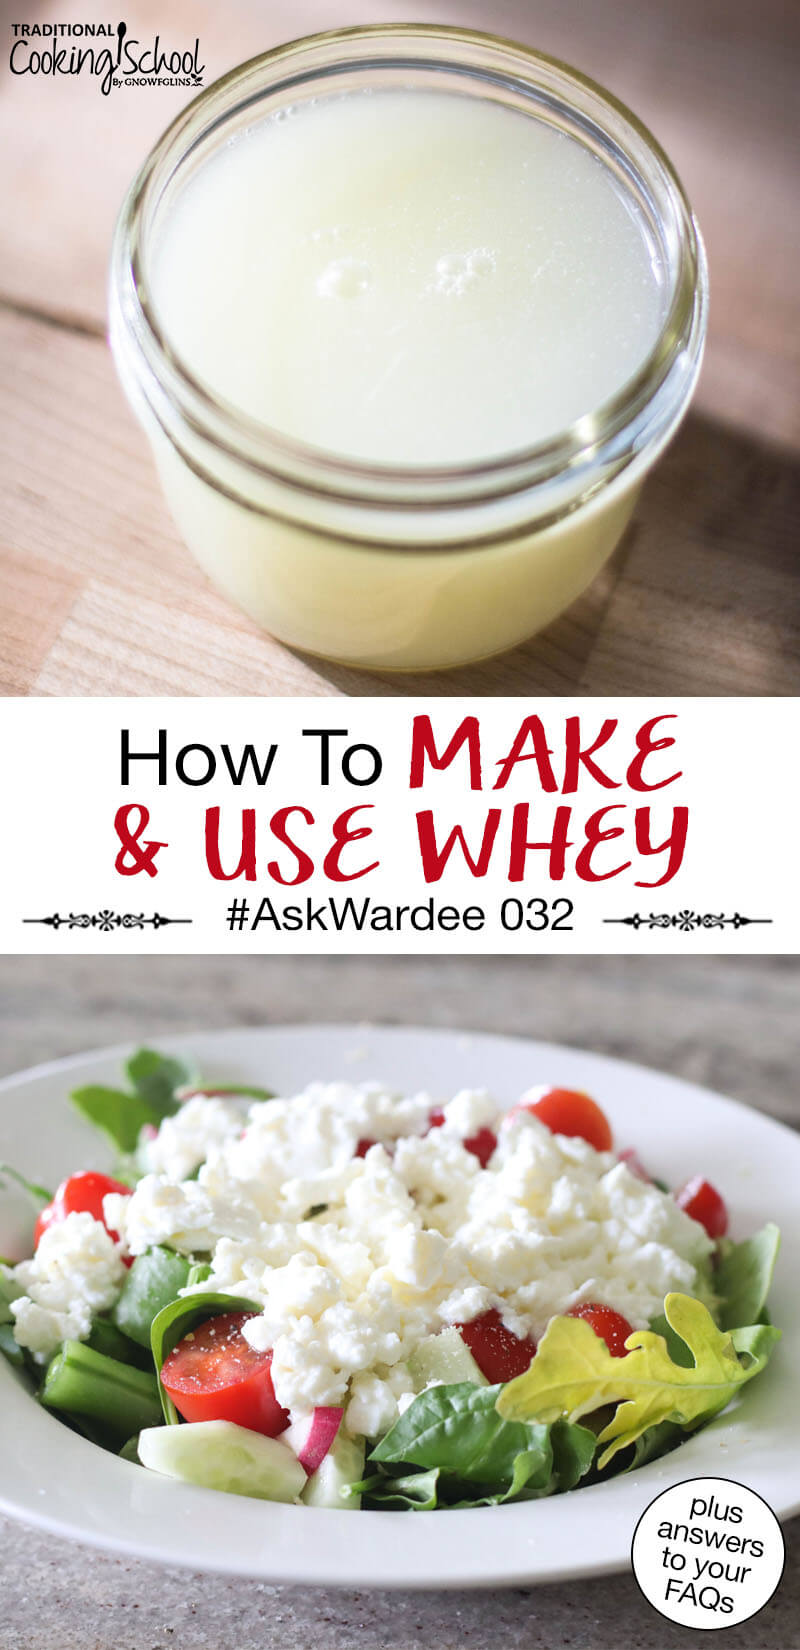 Photo collage of whey in a small glass jar, and a green salad topped with the soft cheese leftover from making whey. Text overlay says: "How To Make & Use Whey #AskWardee 032 (plus answers to your FAQs)"